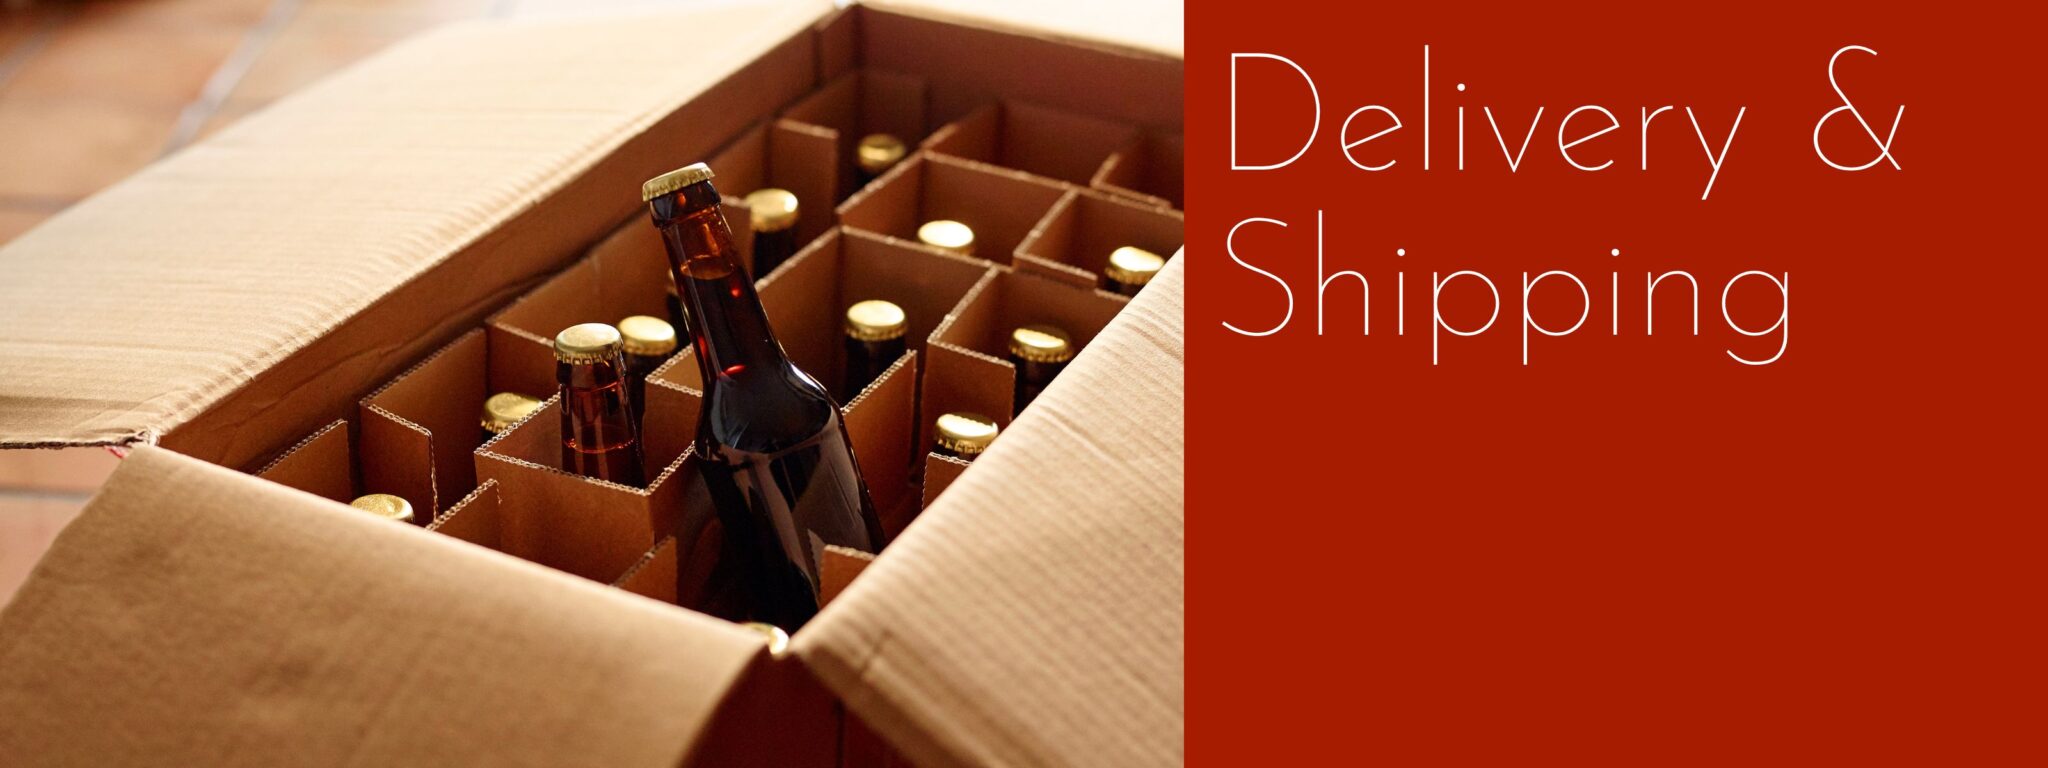 Delivery and Shipping - Tipples Header